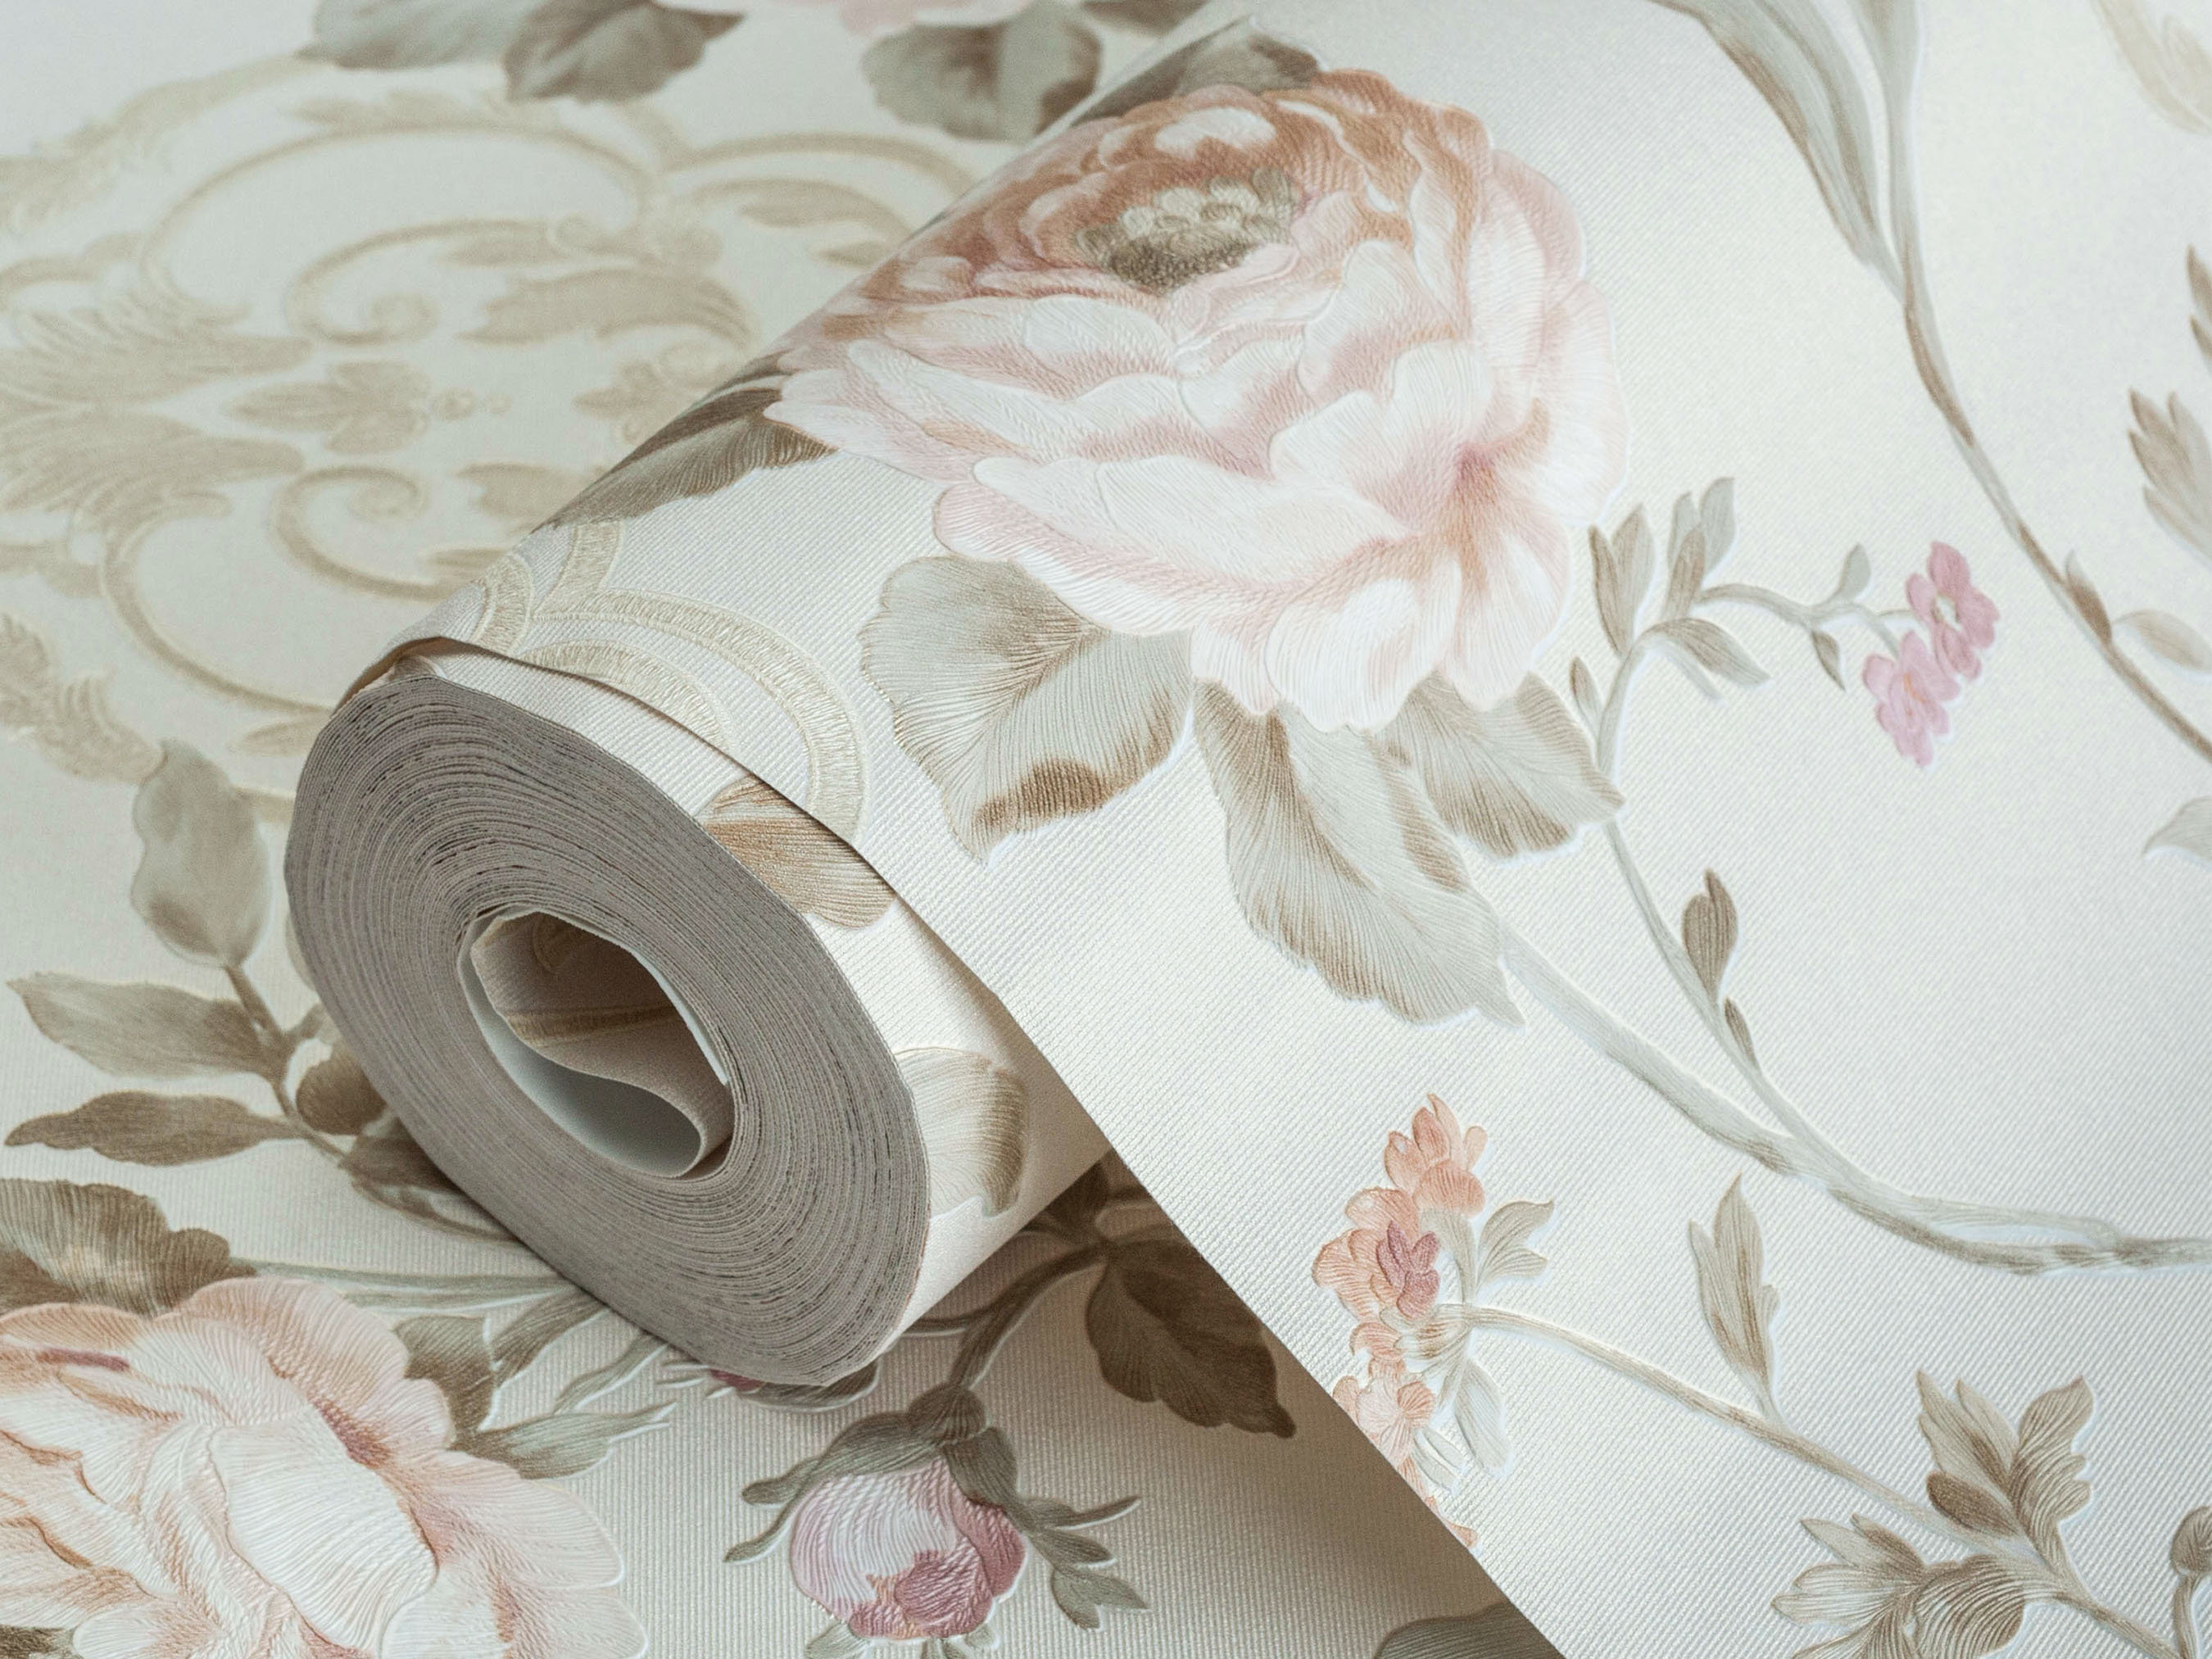 3D Non-woven Wallpaper Roll Embossed Textured Flower Wall Paper Stick Retro  Home